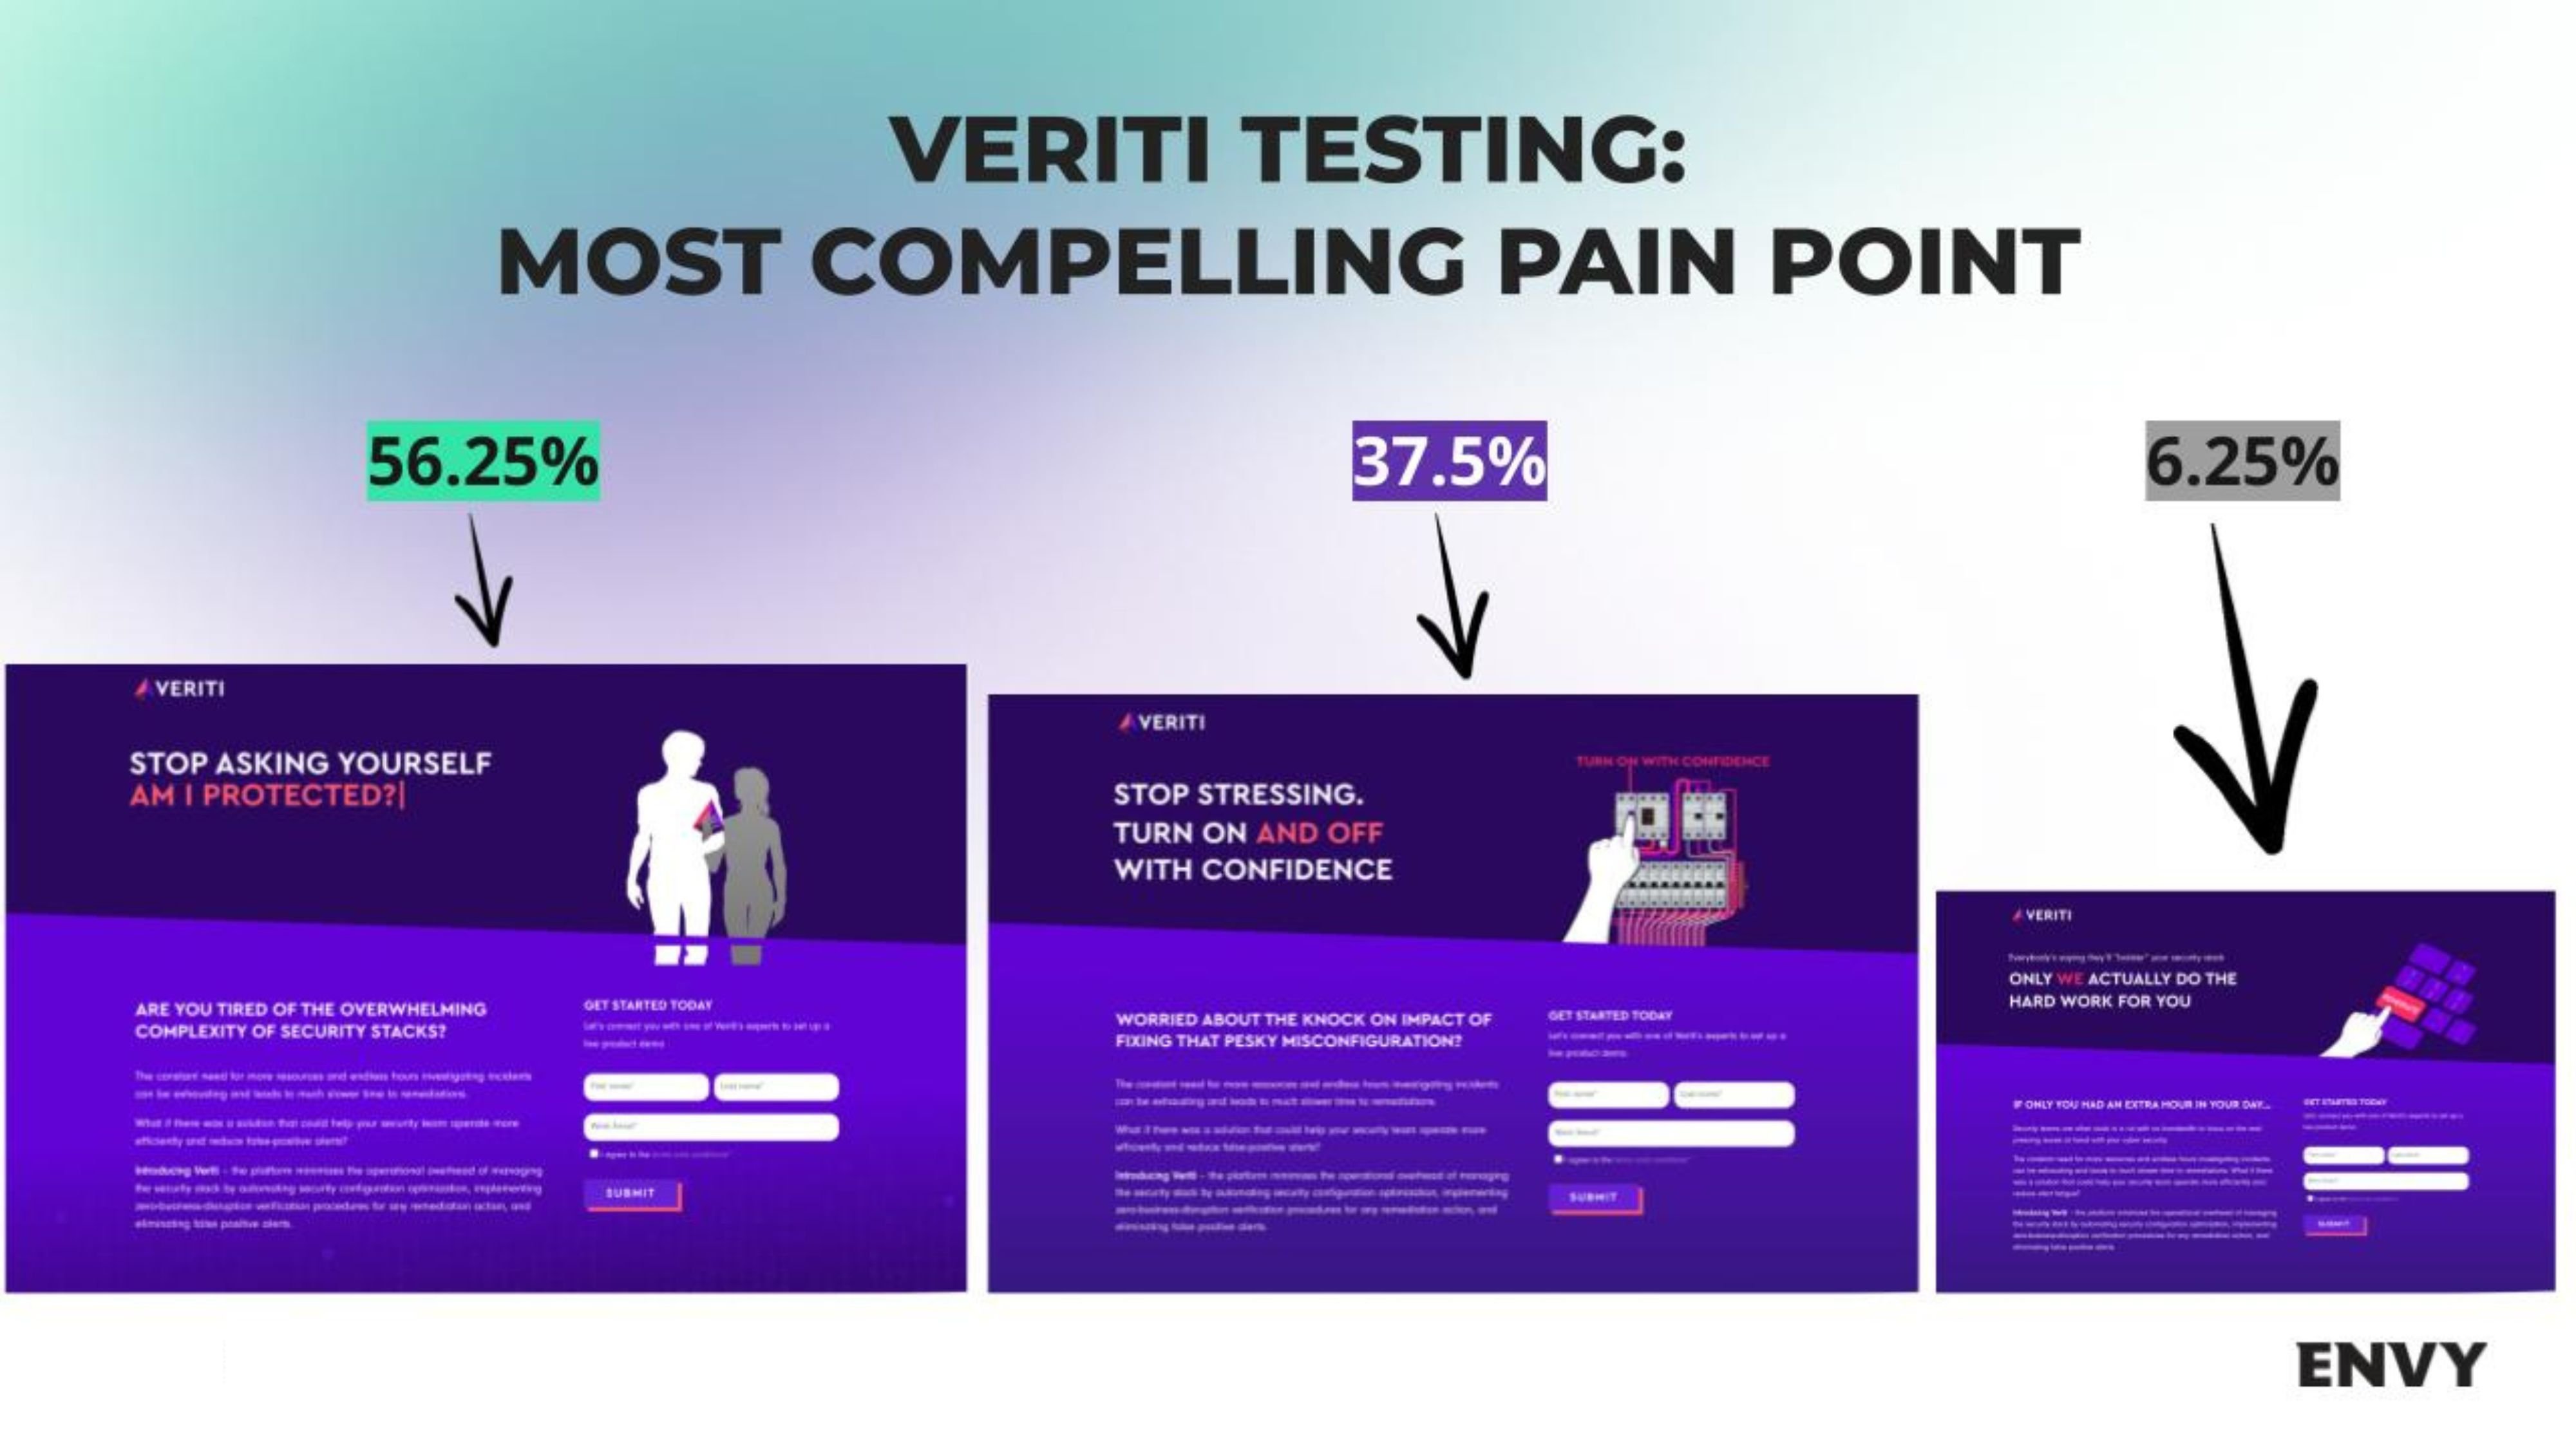 Our client, Veriti, tested their messaging through Wynter to get to the most compelling pain point